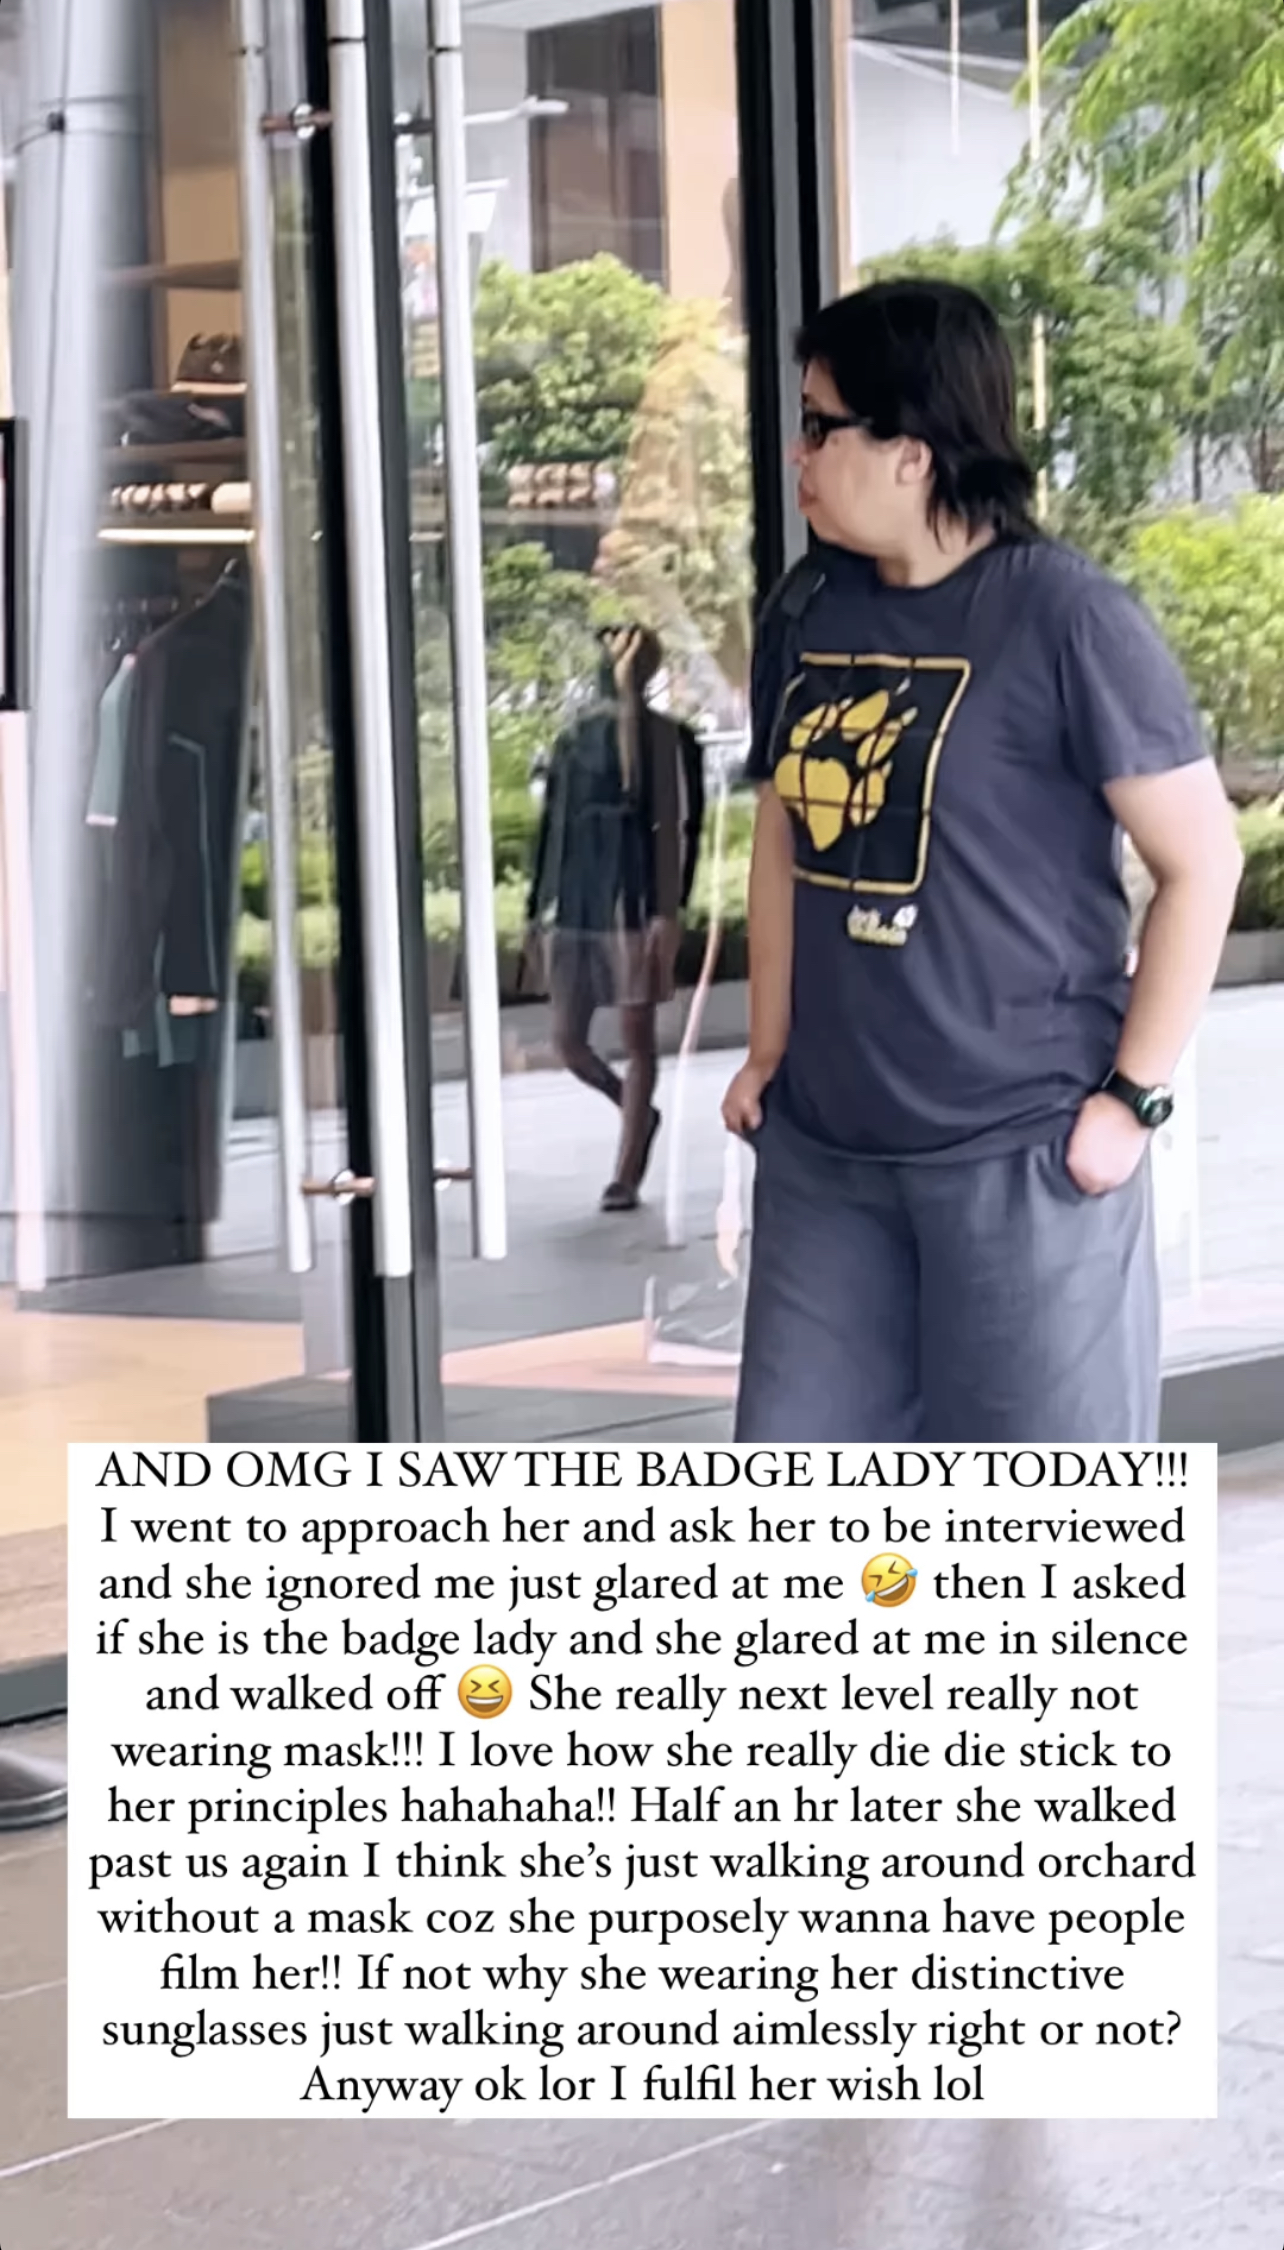 Xiaxue ran into the MBS “Badge Lady” on the streets